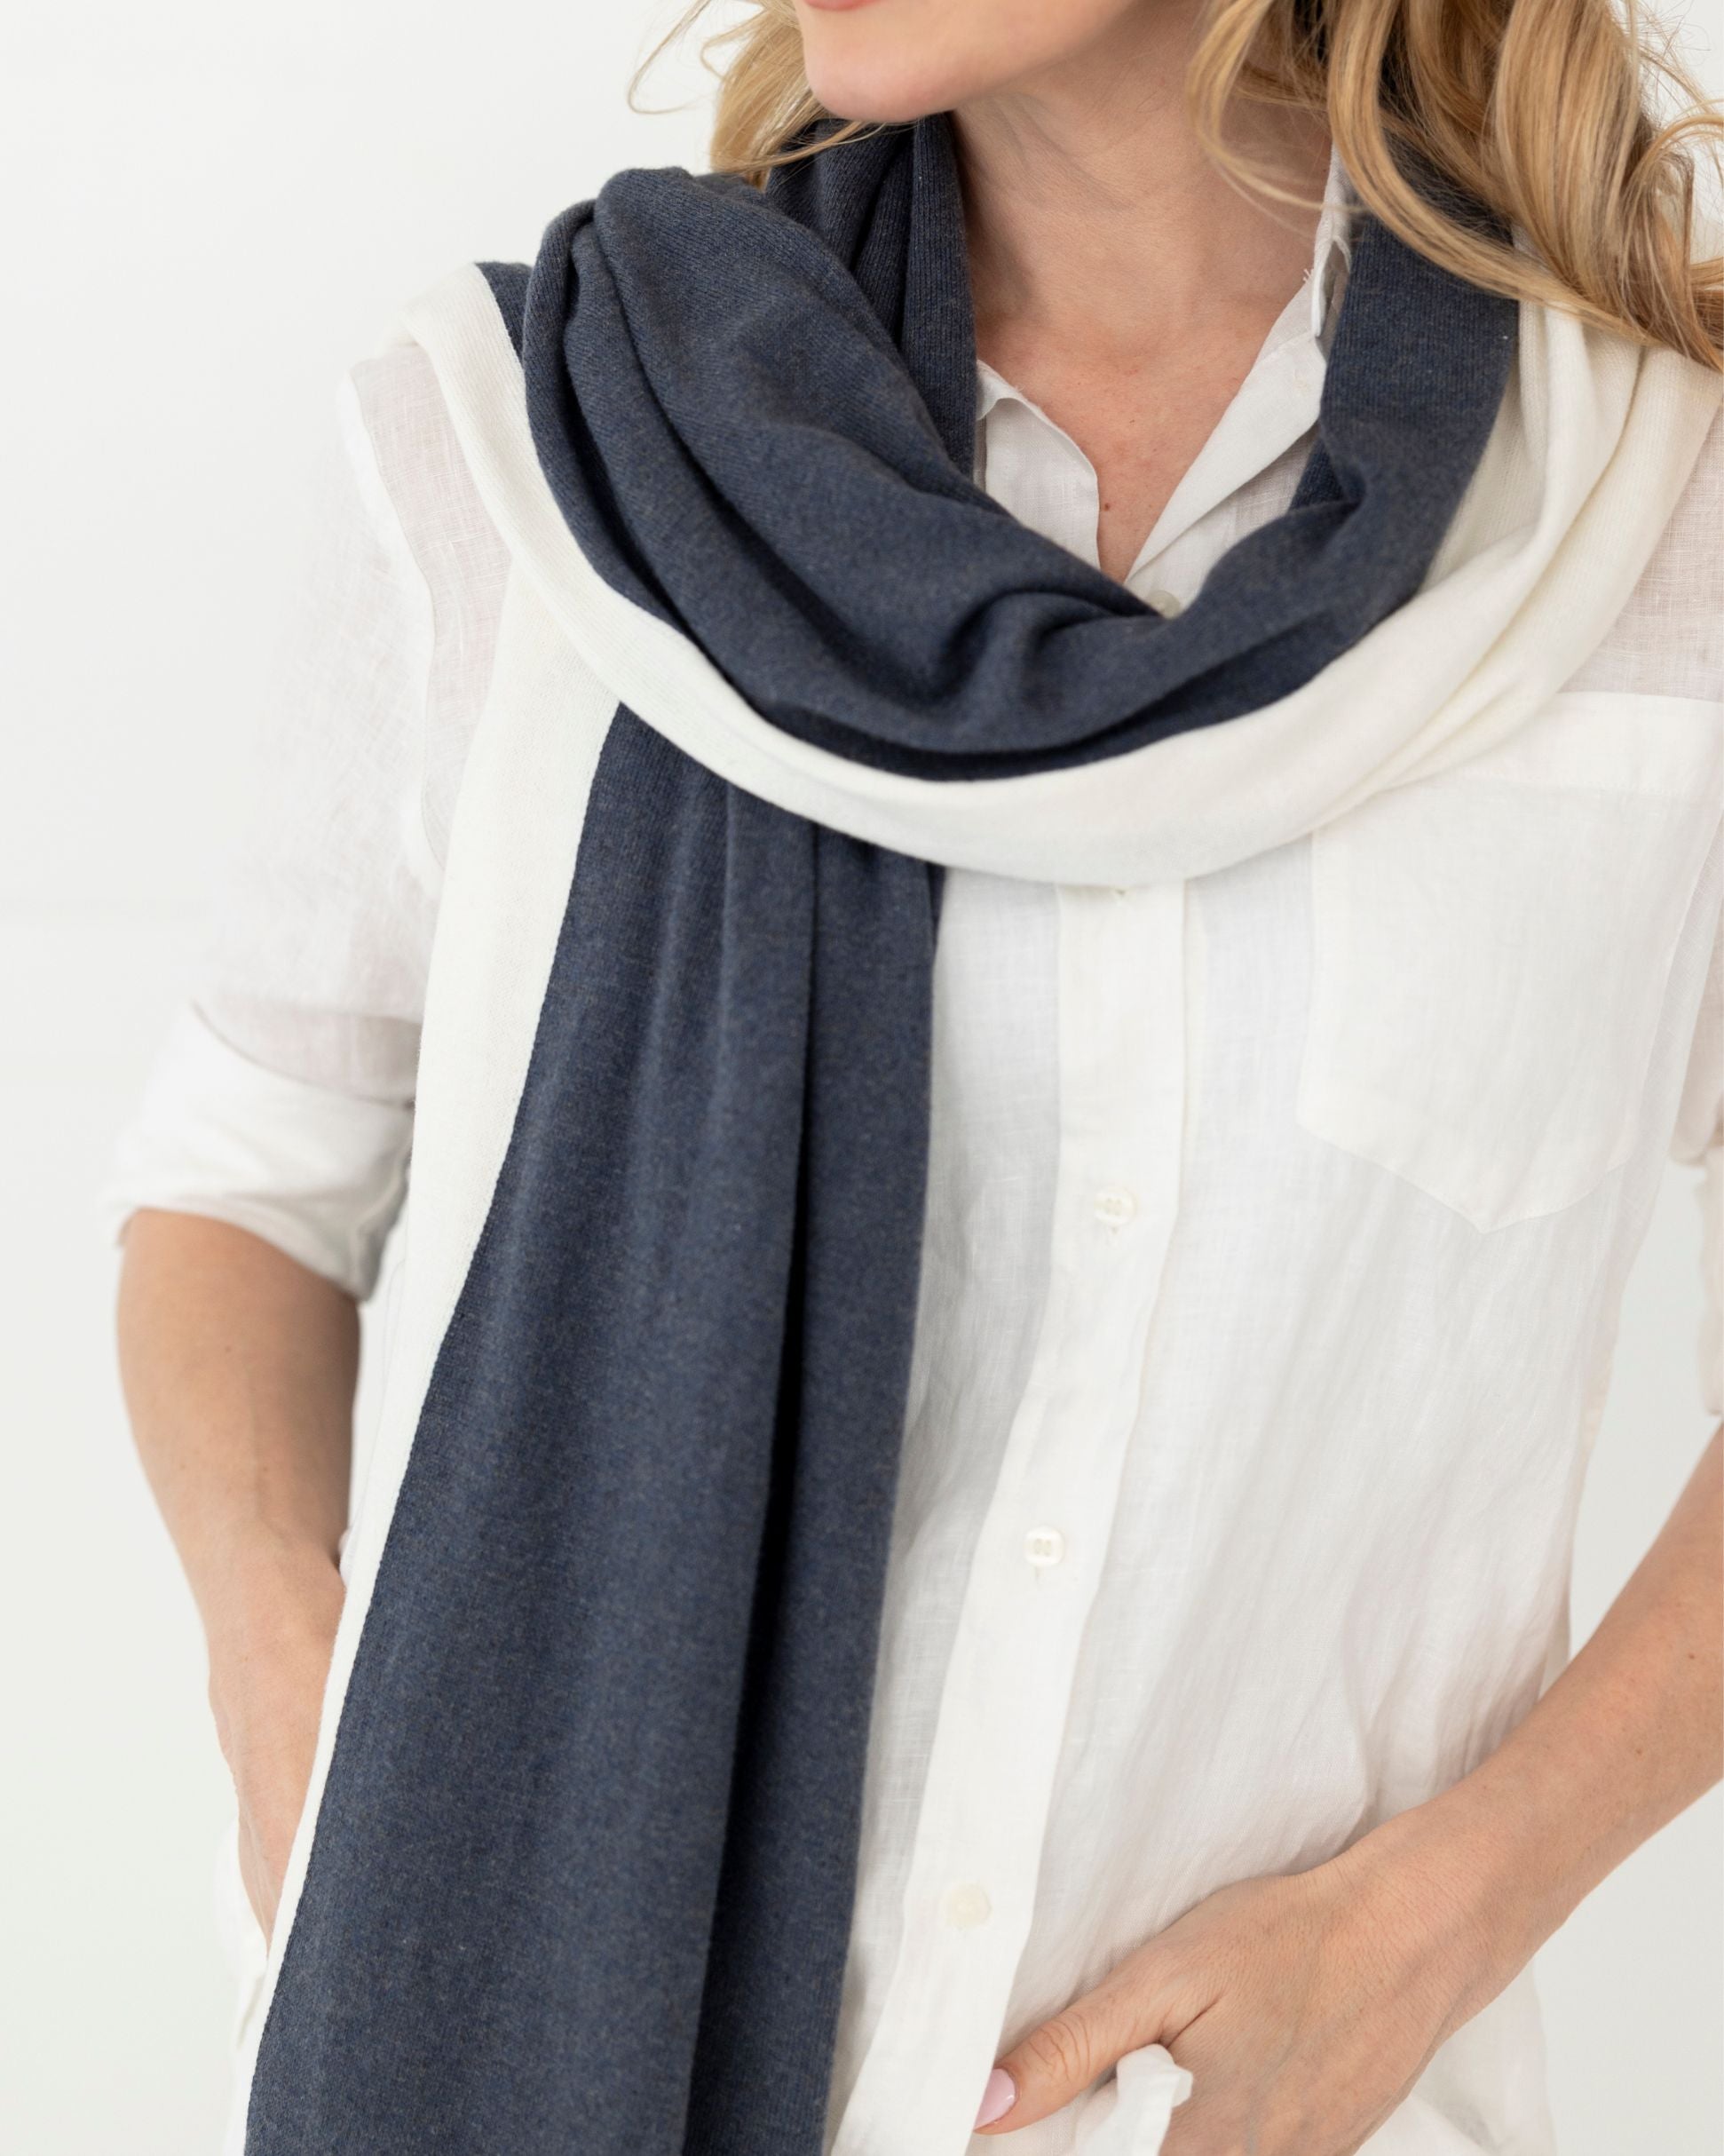 Woman wearing the Dreamsoft Travel Scarf as a scarf in Denim Colorblock which is a dark blue, slate blue and cream scarf